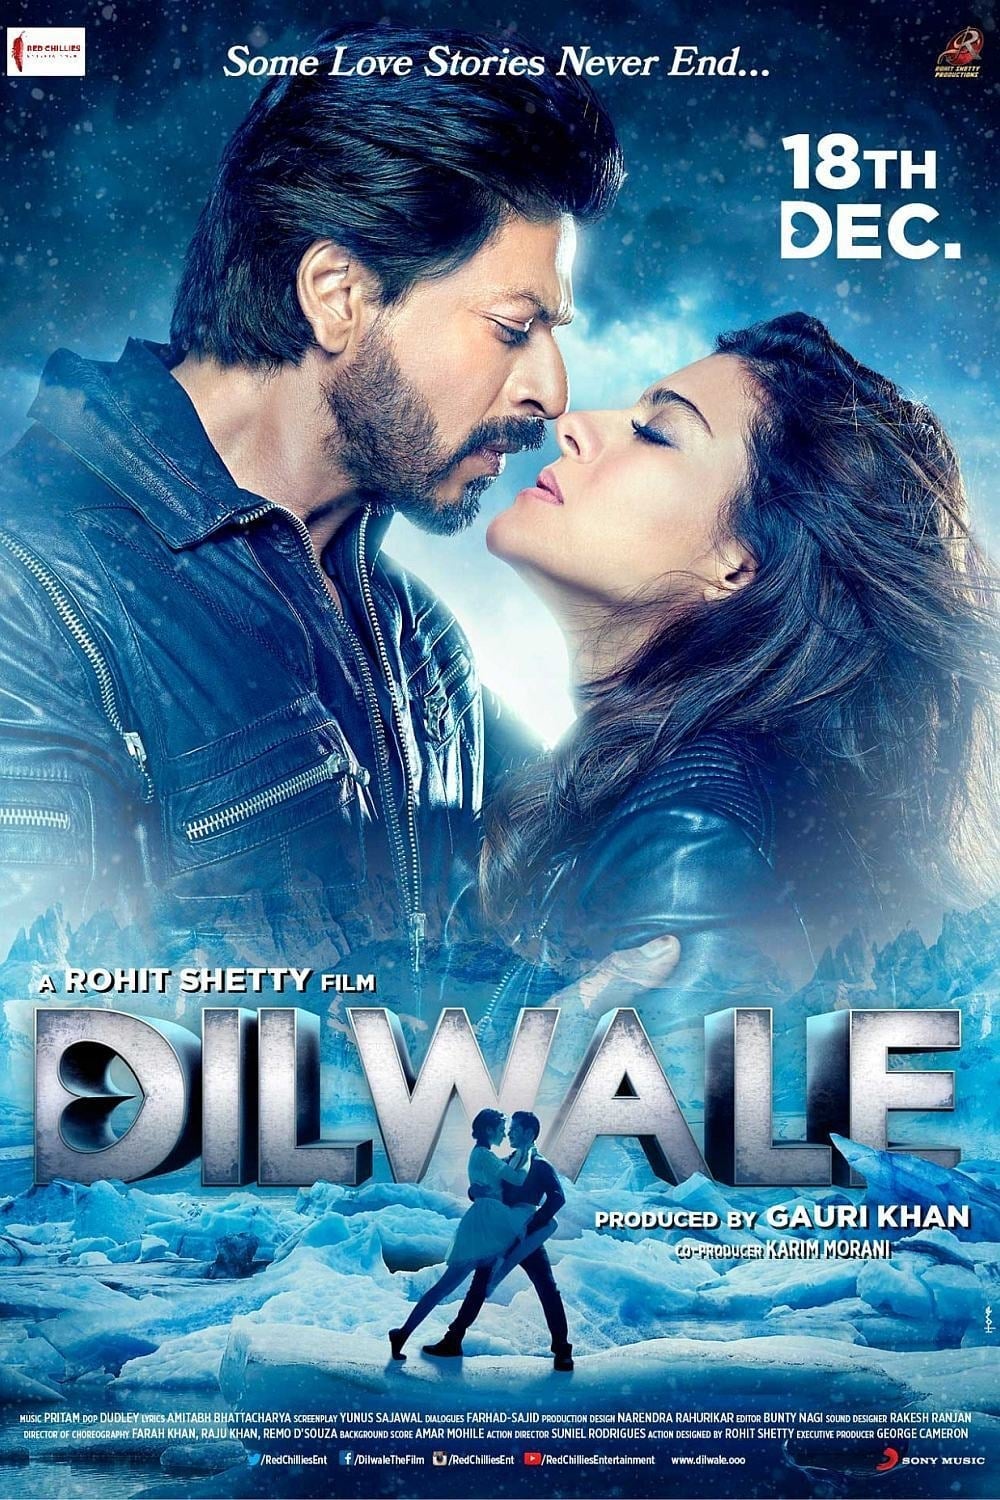 Dilwale (2015) Hindi 1080p-720p-480p BluRay x264 AAC 5.1 ESubs Full Bollywood Movie